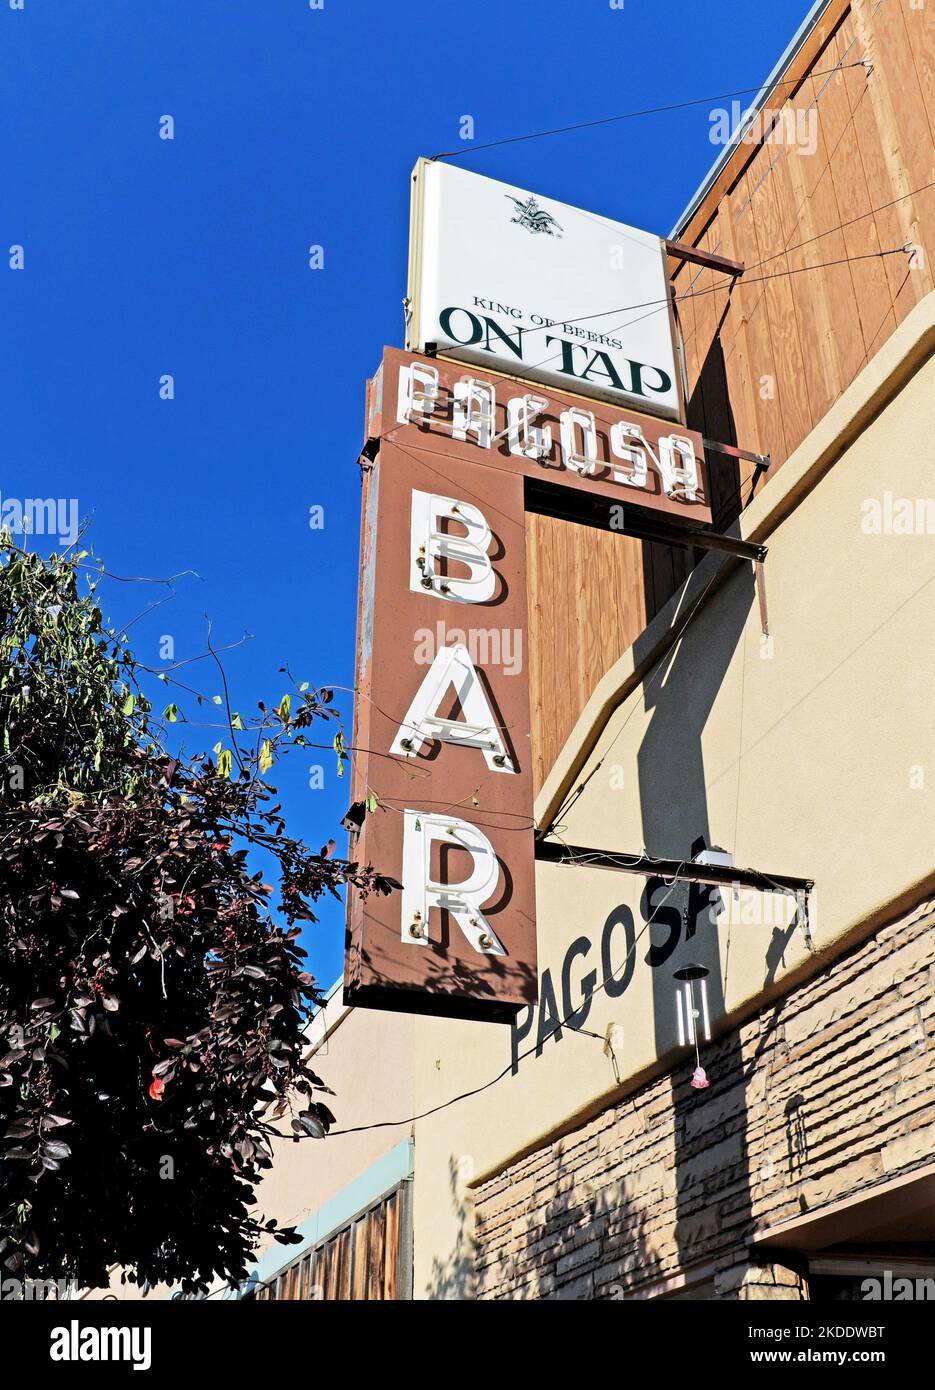 Pagosa Bar on the main street in downtown Pagosa Springs, Colorado, is an old-school old west bar with an old school marquee sign outside Stock Photo